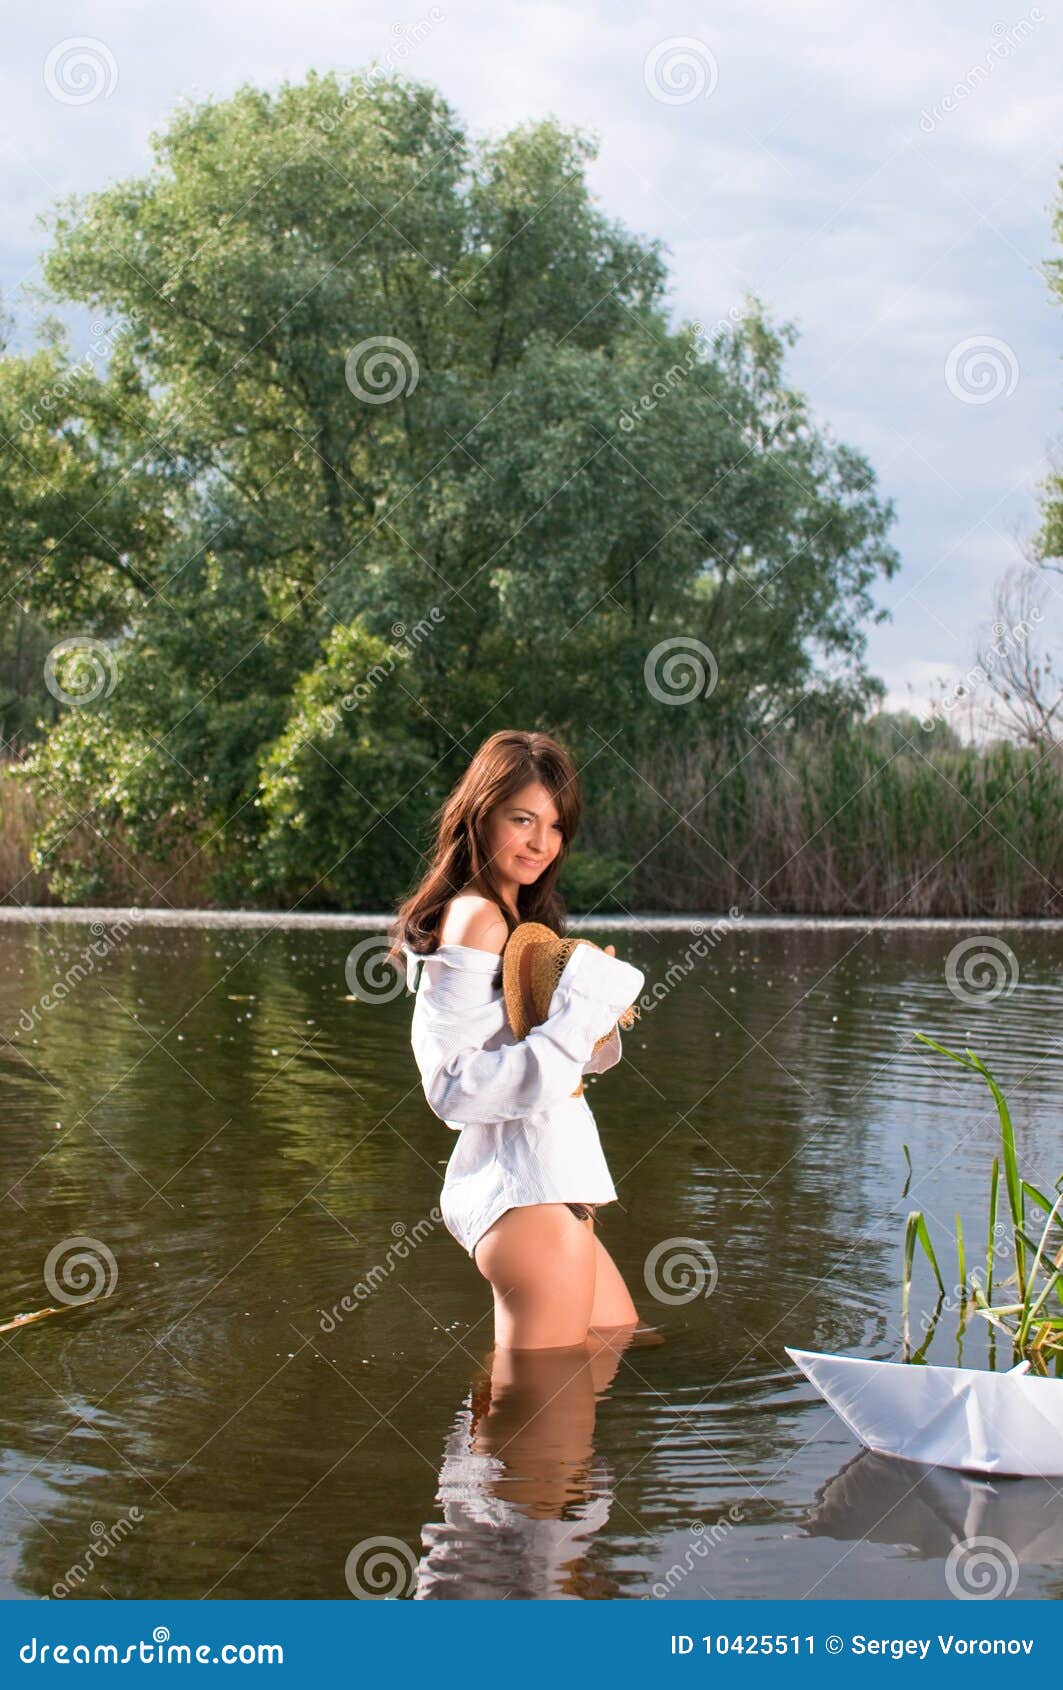 handsome girl in river stock image. image of green